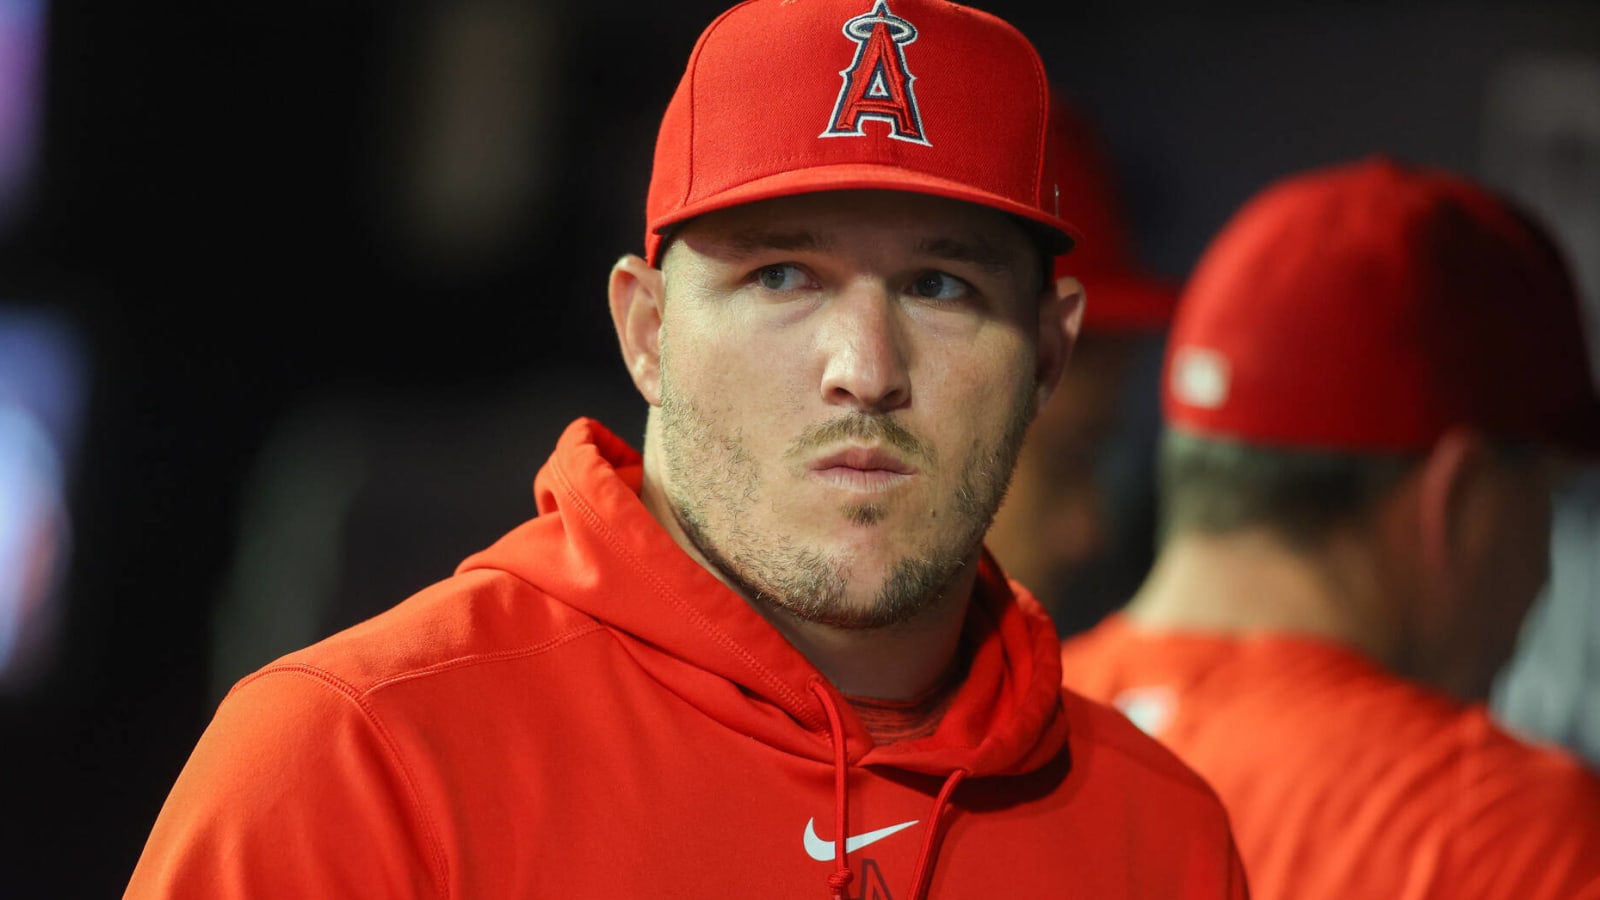 Mike Trout did not look too happy for his photo with Shohei Ohtani